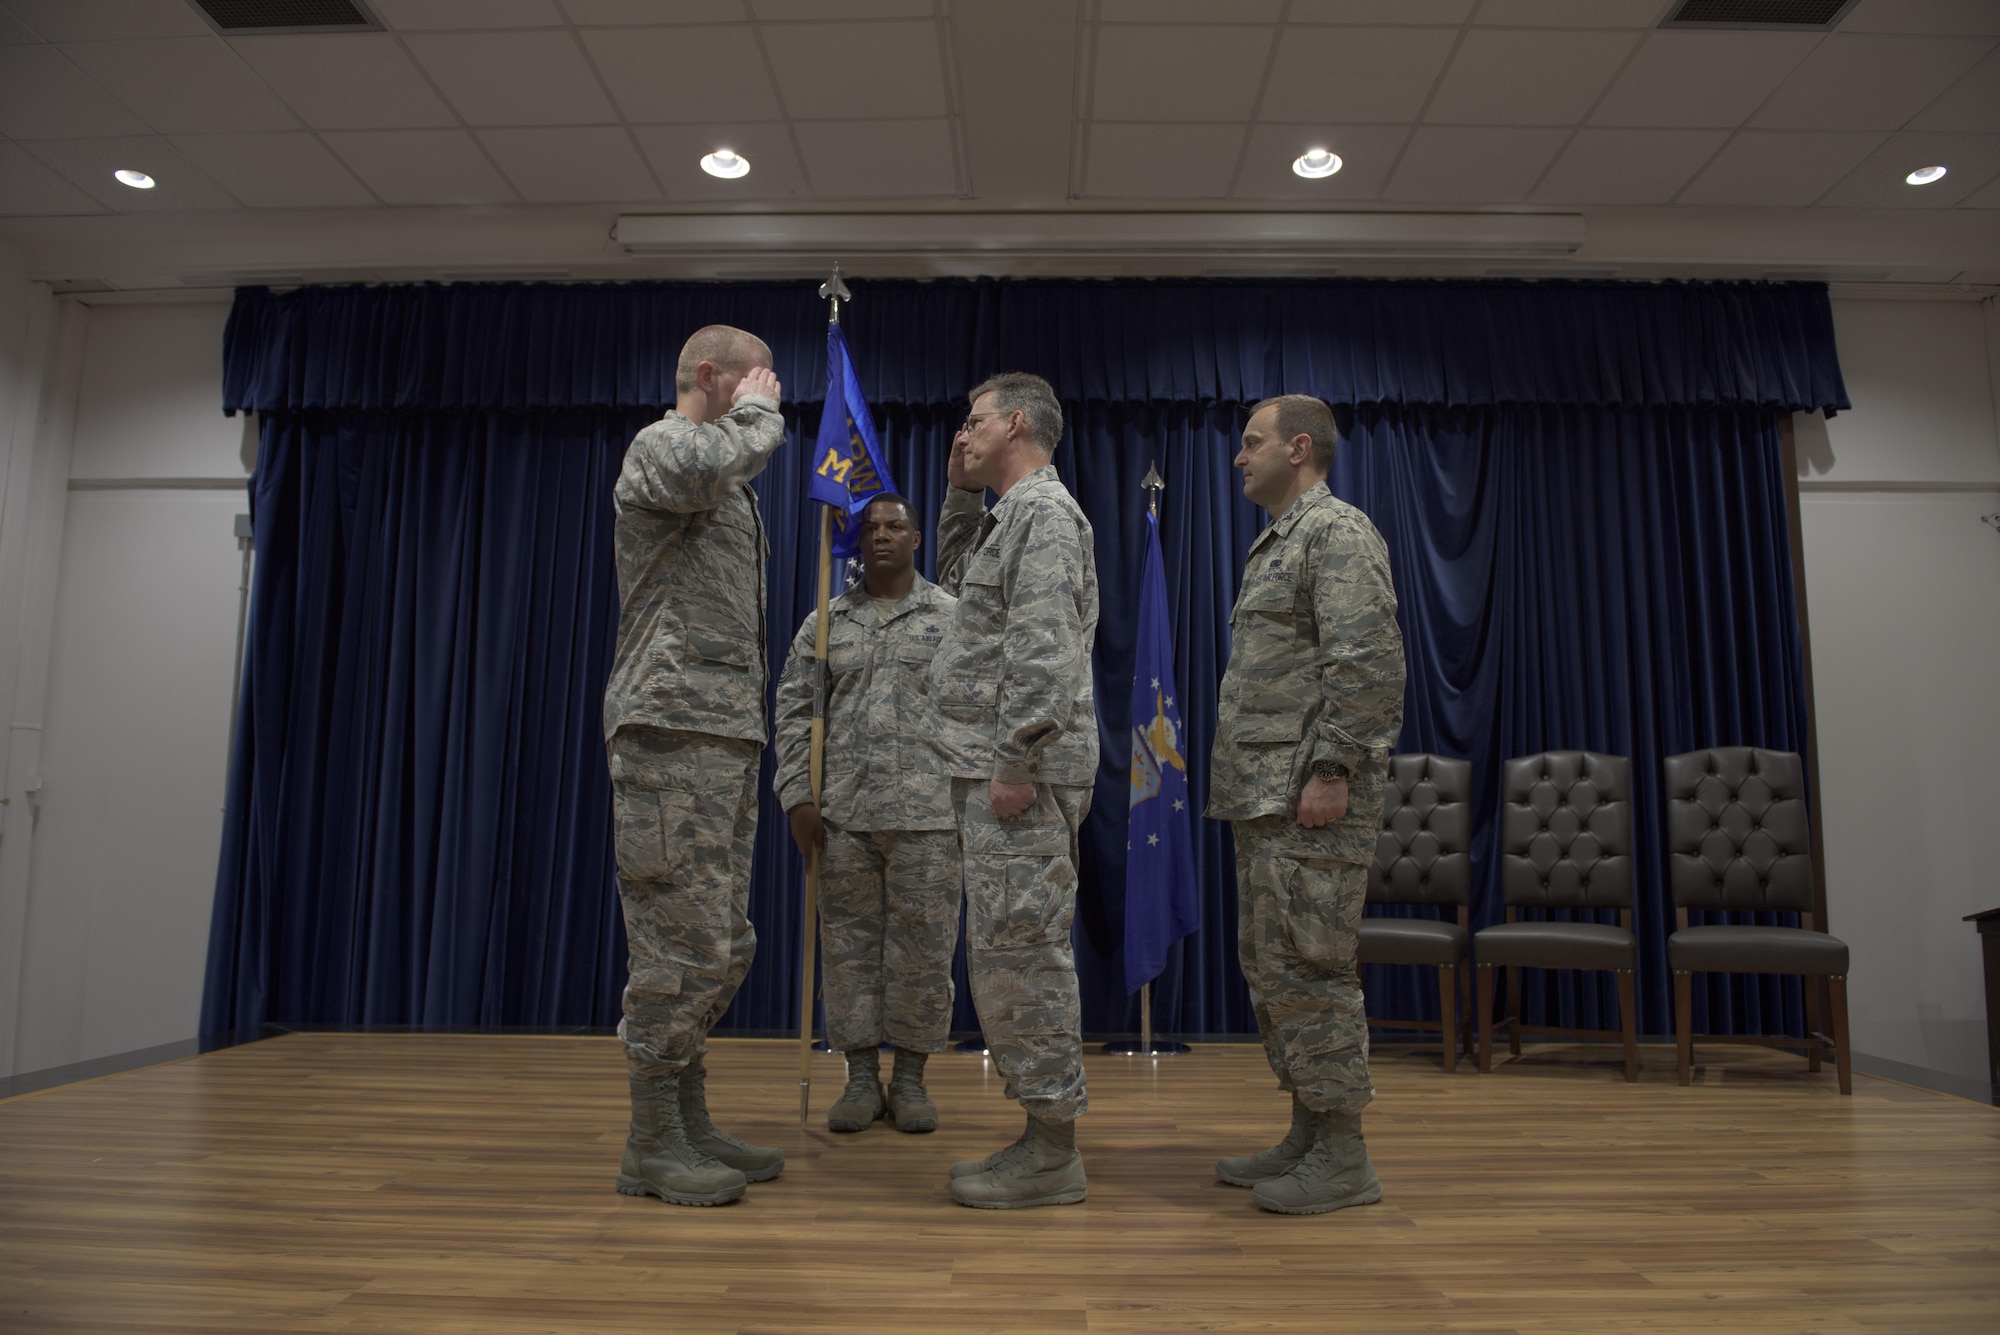 Col. John Walker, 39th Air Base Wing commander, and Col. Thomas A. Bacon, outgoing 39th Medical Group commander, exchange salutes during the 39th MDG change of command ceremony  May 27, 2017, at Incirlik Air Base, Turkey. (U.S. Air Force photo by Airman 1st Class Kristan Campbell)